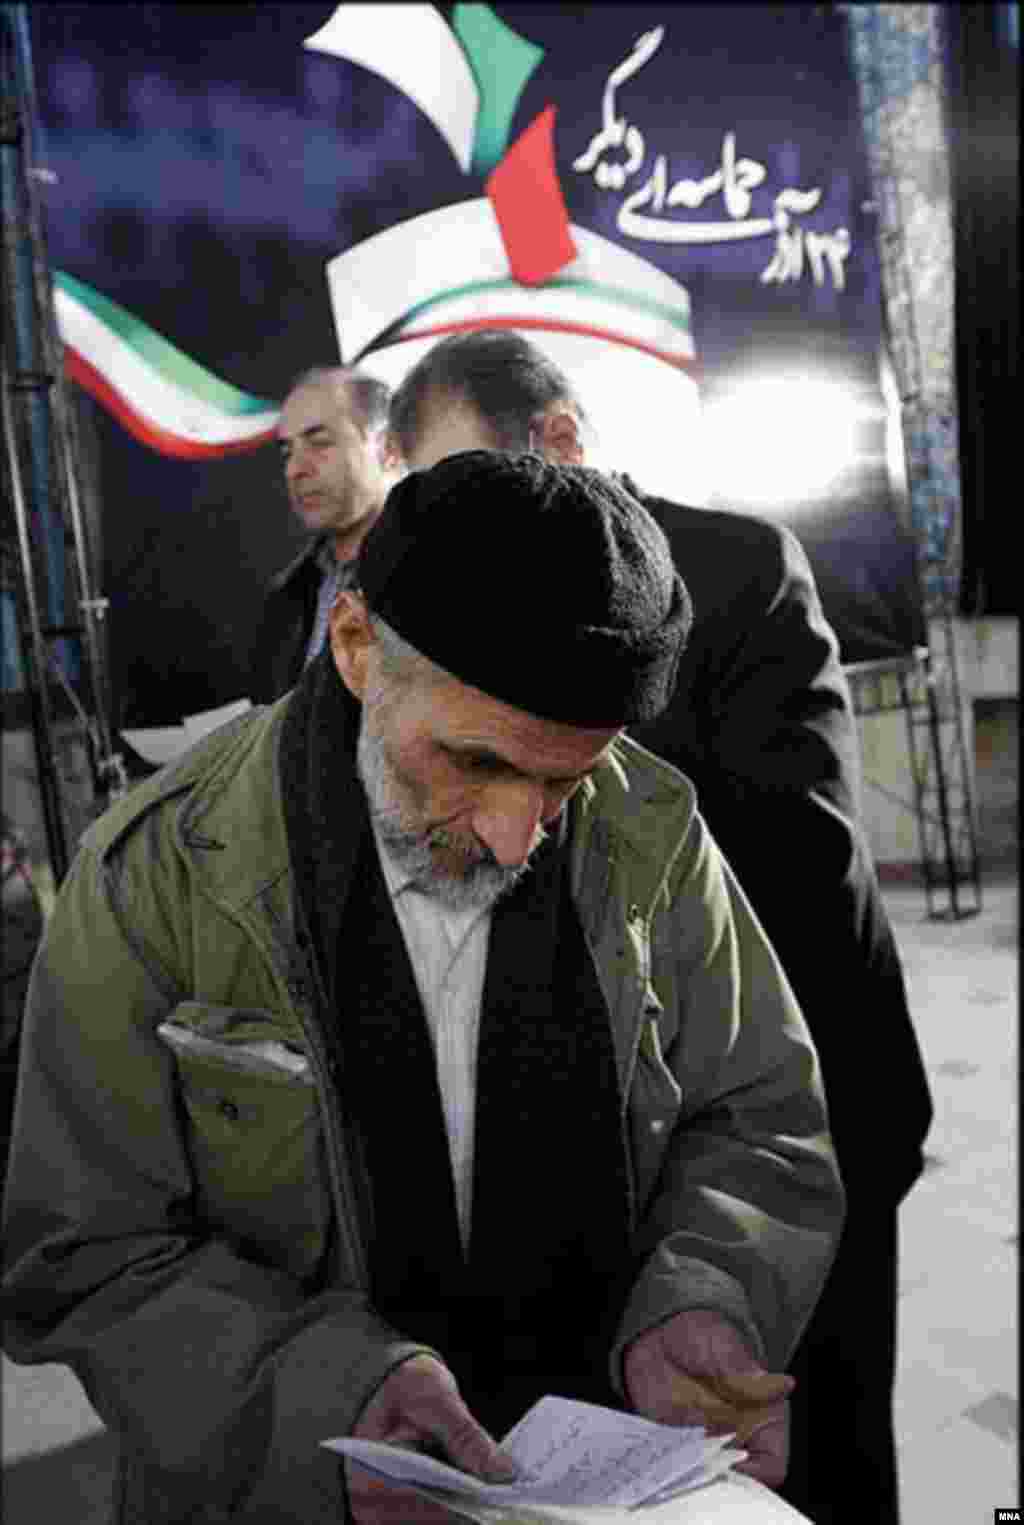 Iran - Iranians were voting in elections for municipal councils and the Assembly of Experts, Tehran, 15Dec2006